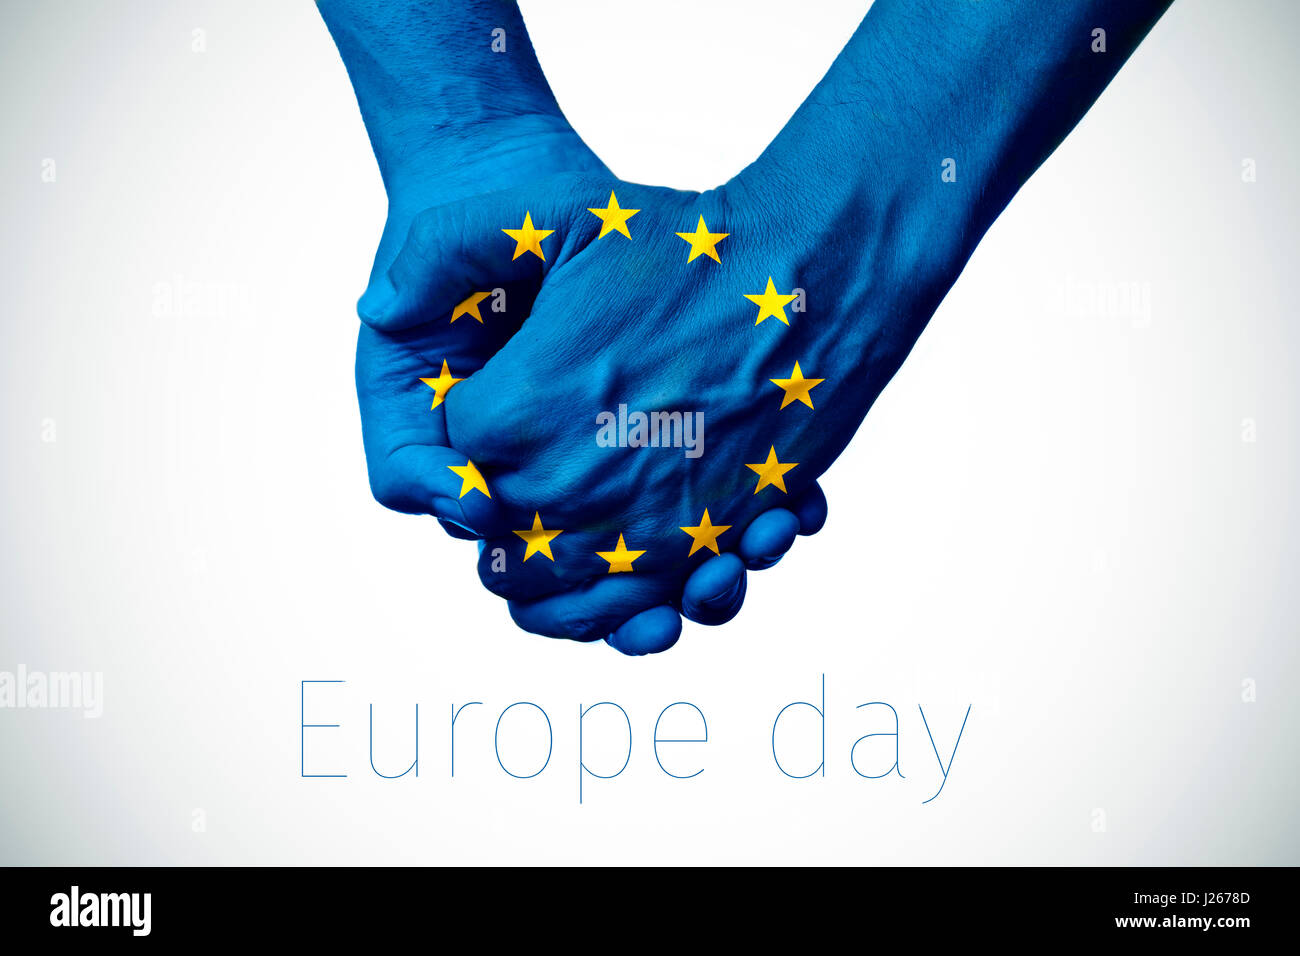 two persons holding hands patterned with the flag of the european community and the text europe day on an off-white background, with a slight vignette Stock Photo